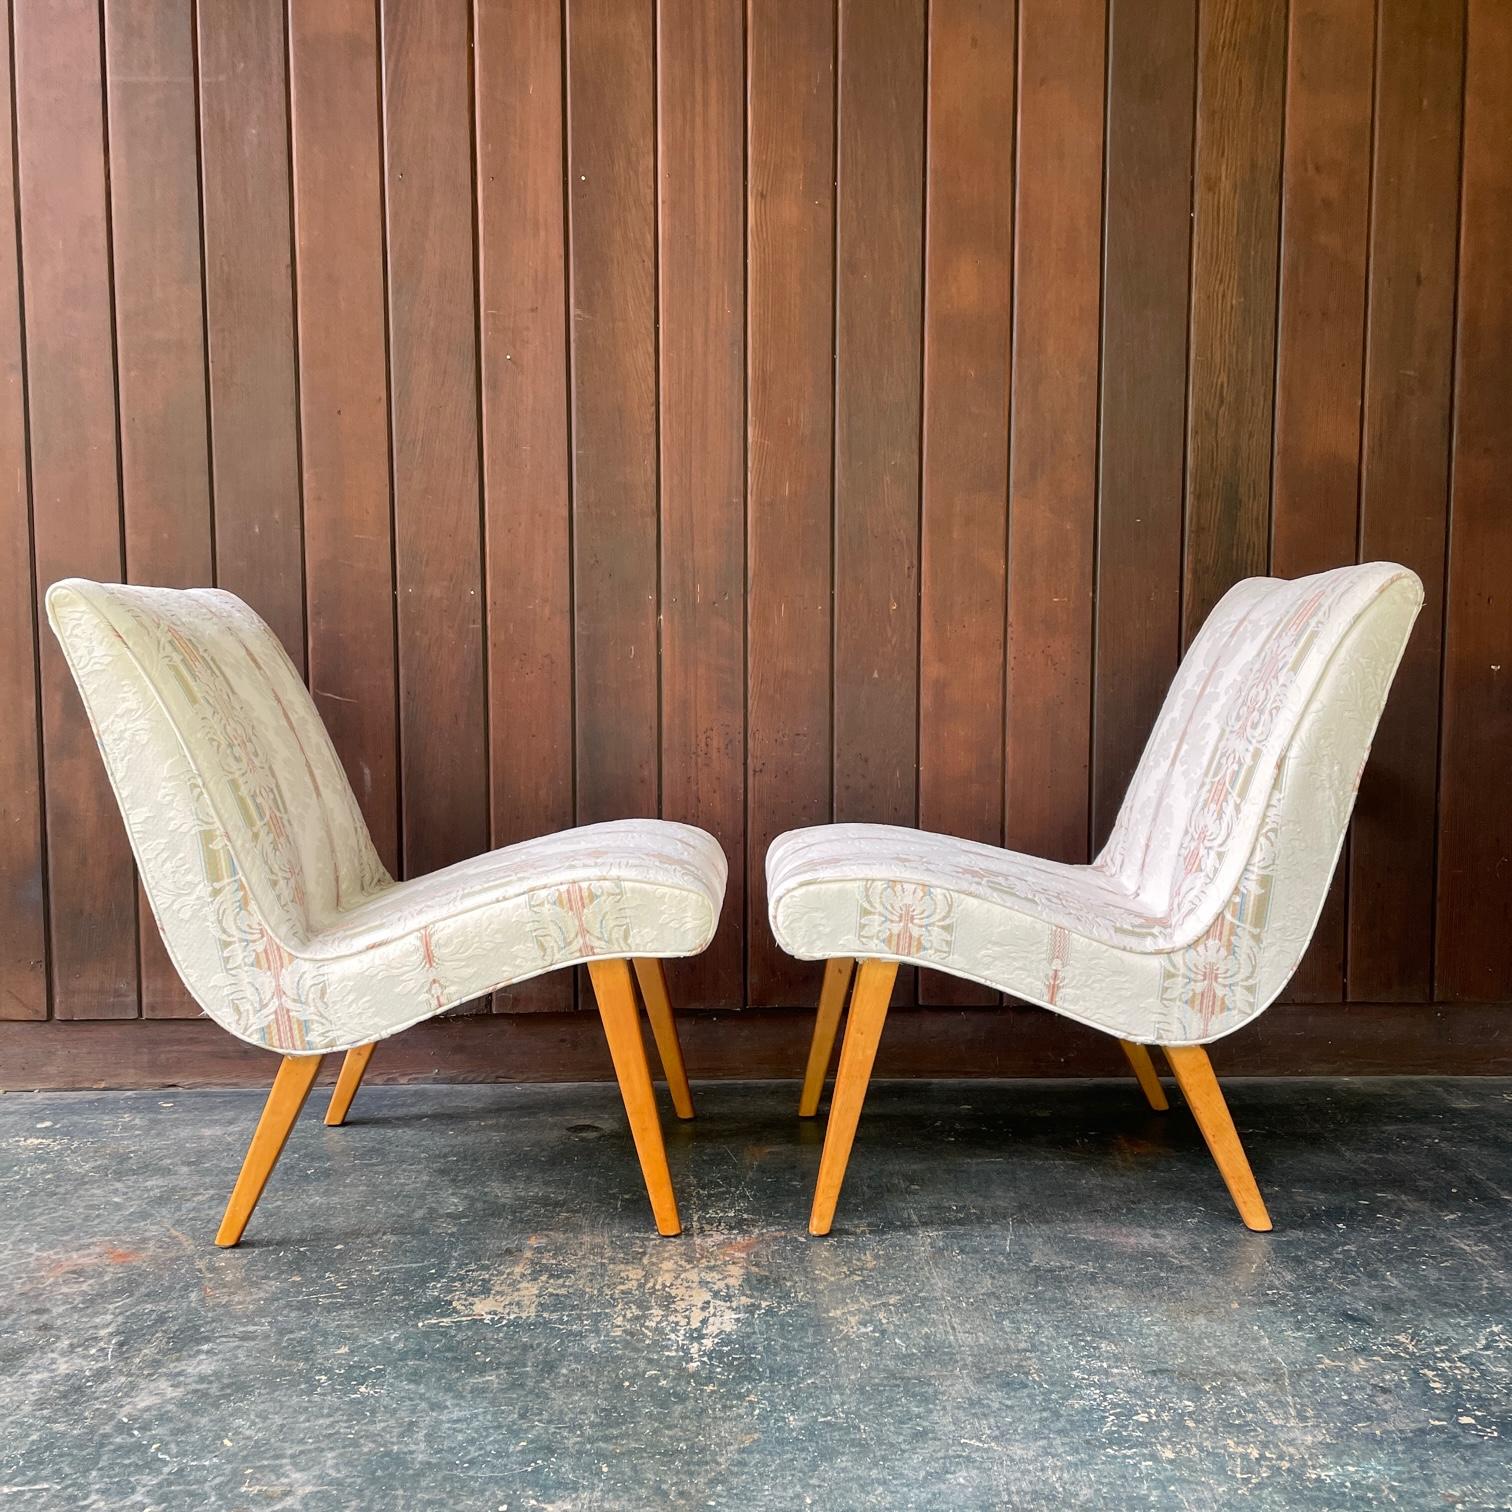 A matching pair of Jens Risom's Vostra Lounge Chairs for Knoll, Germany. Feet in beechwood, from 1949. 

W 20 x D 30 x Seat H 17 / Back H 30 in.